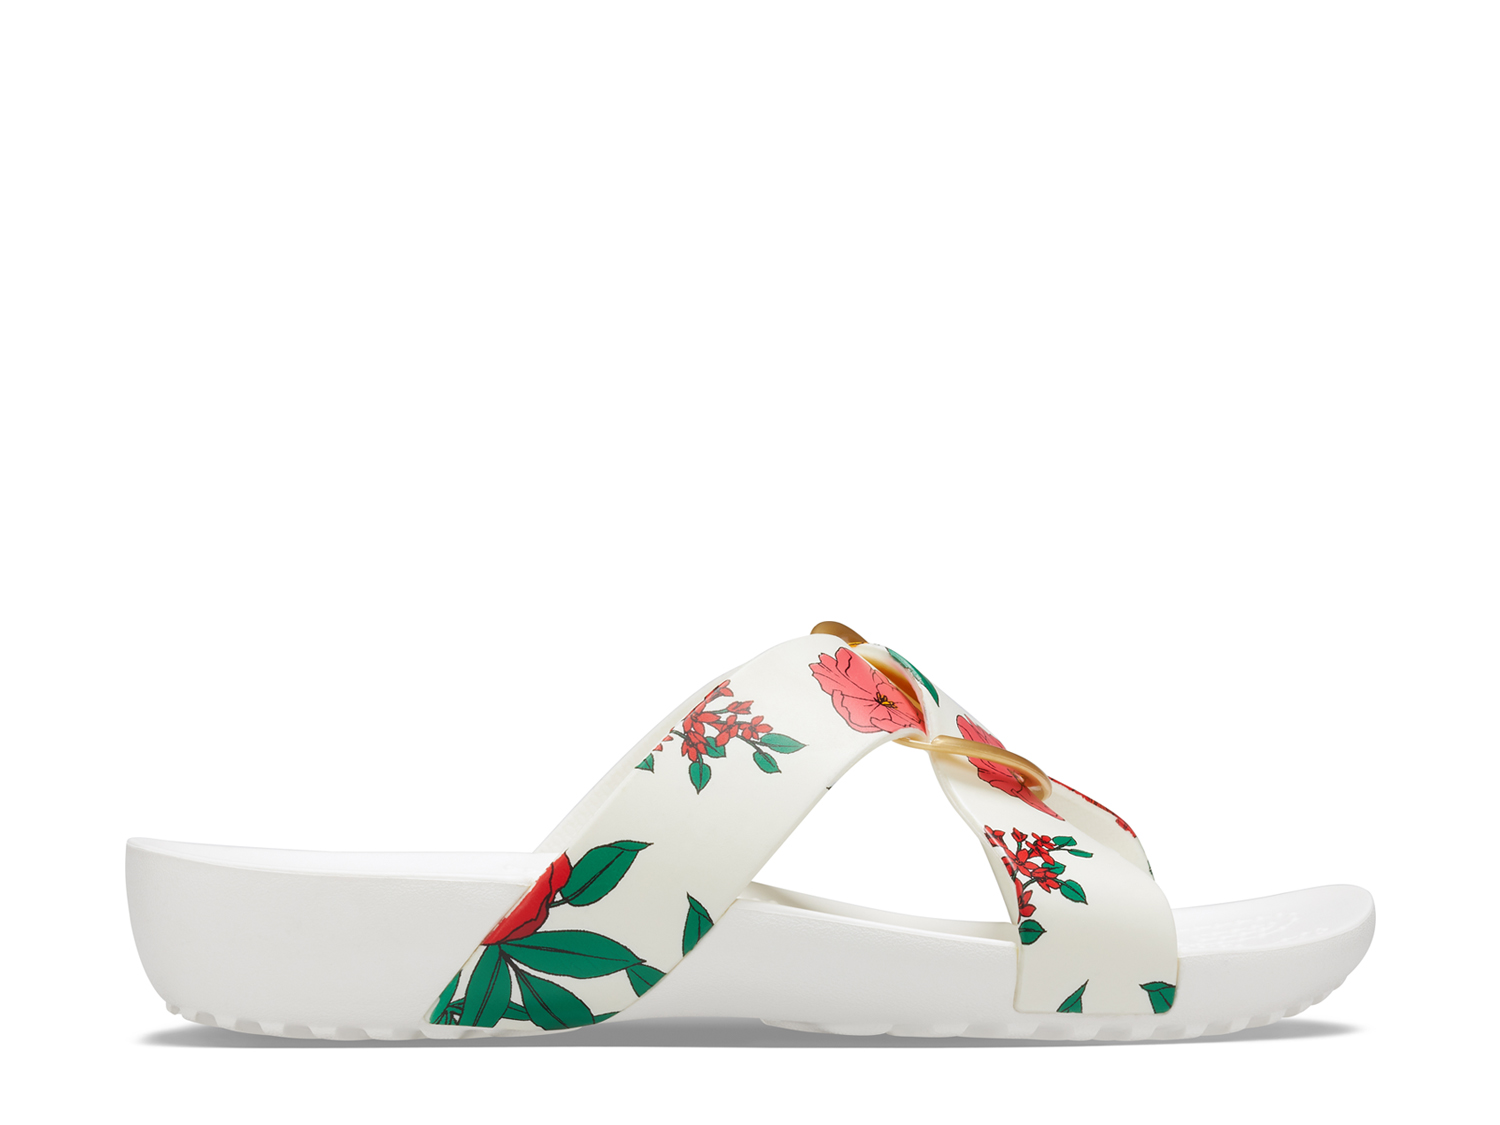 Details about   NEW GENUINE Crocs Serena Printed Cross Band Slide Floral White 